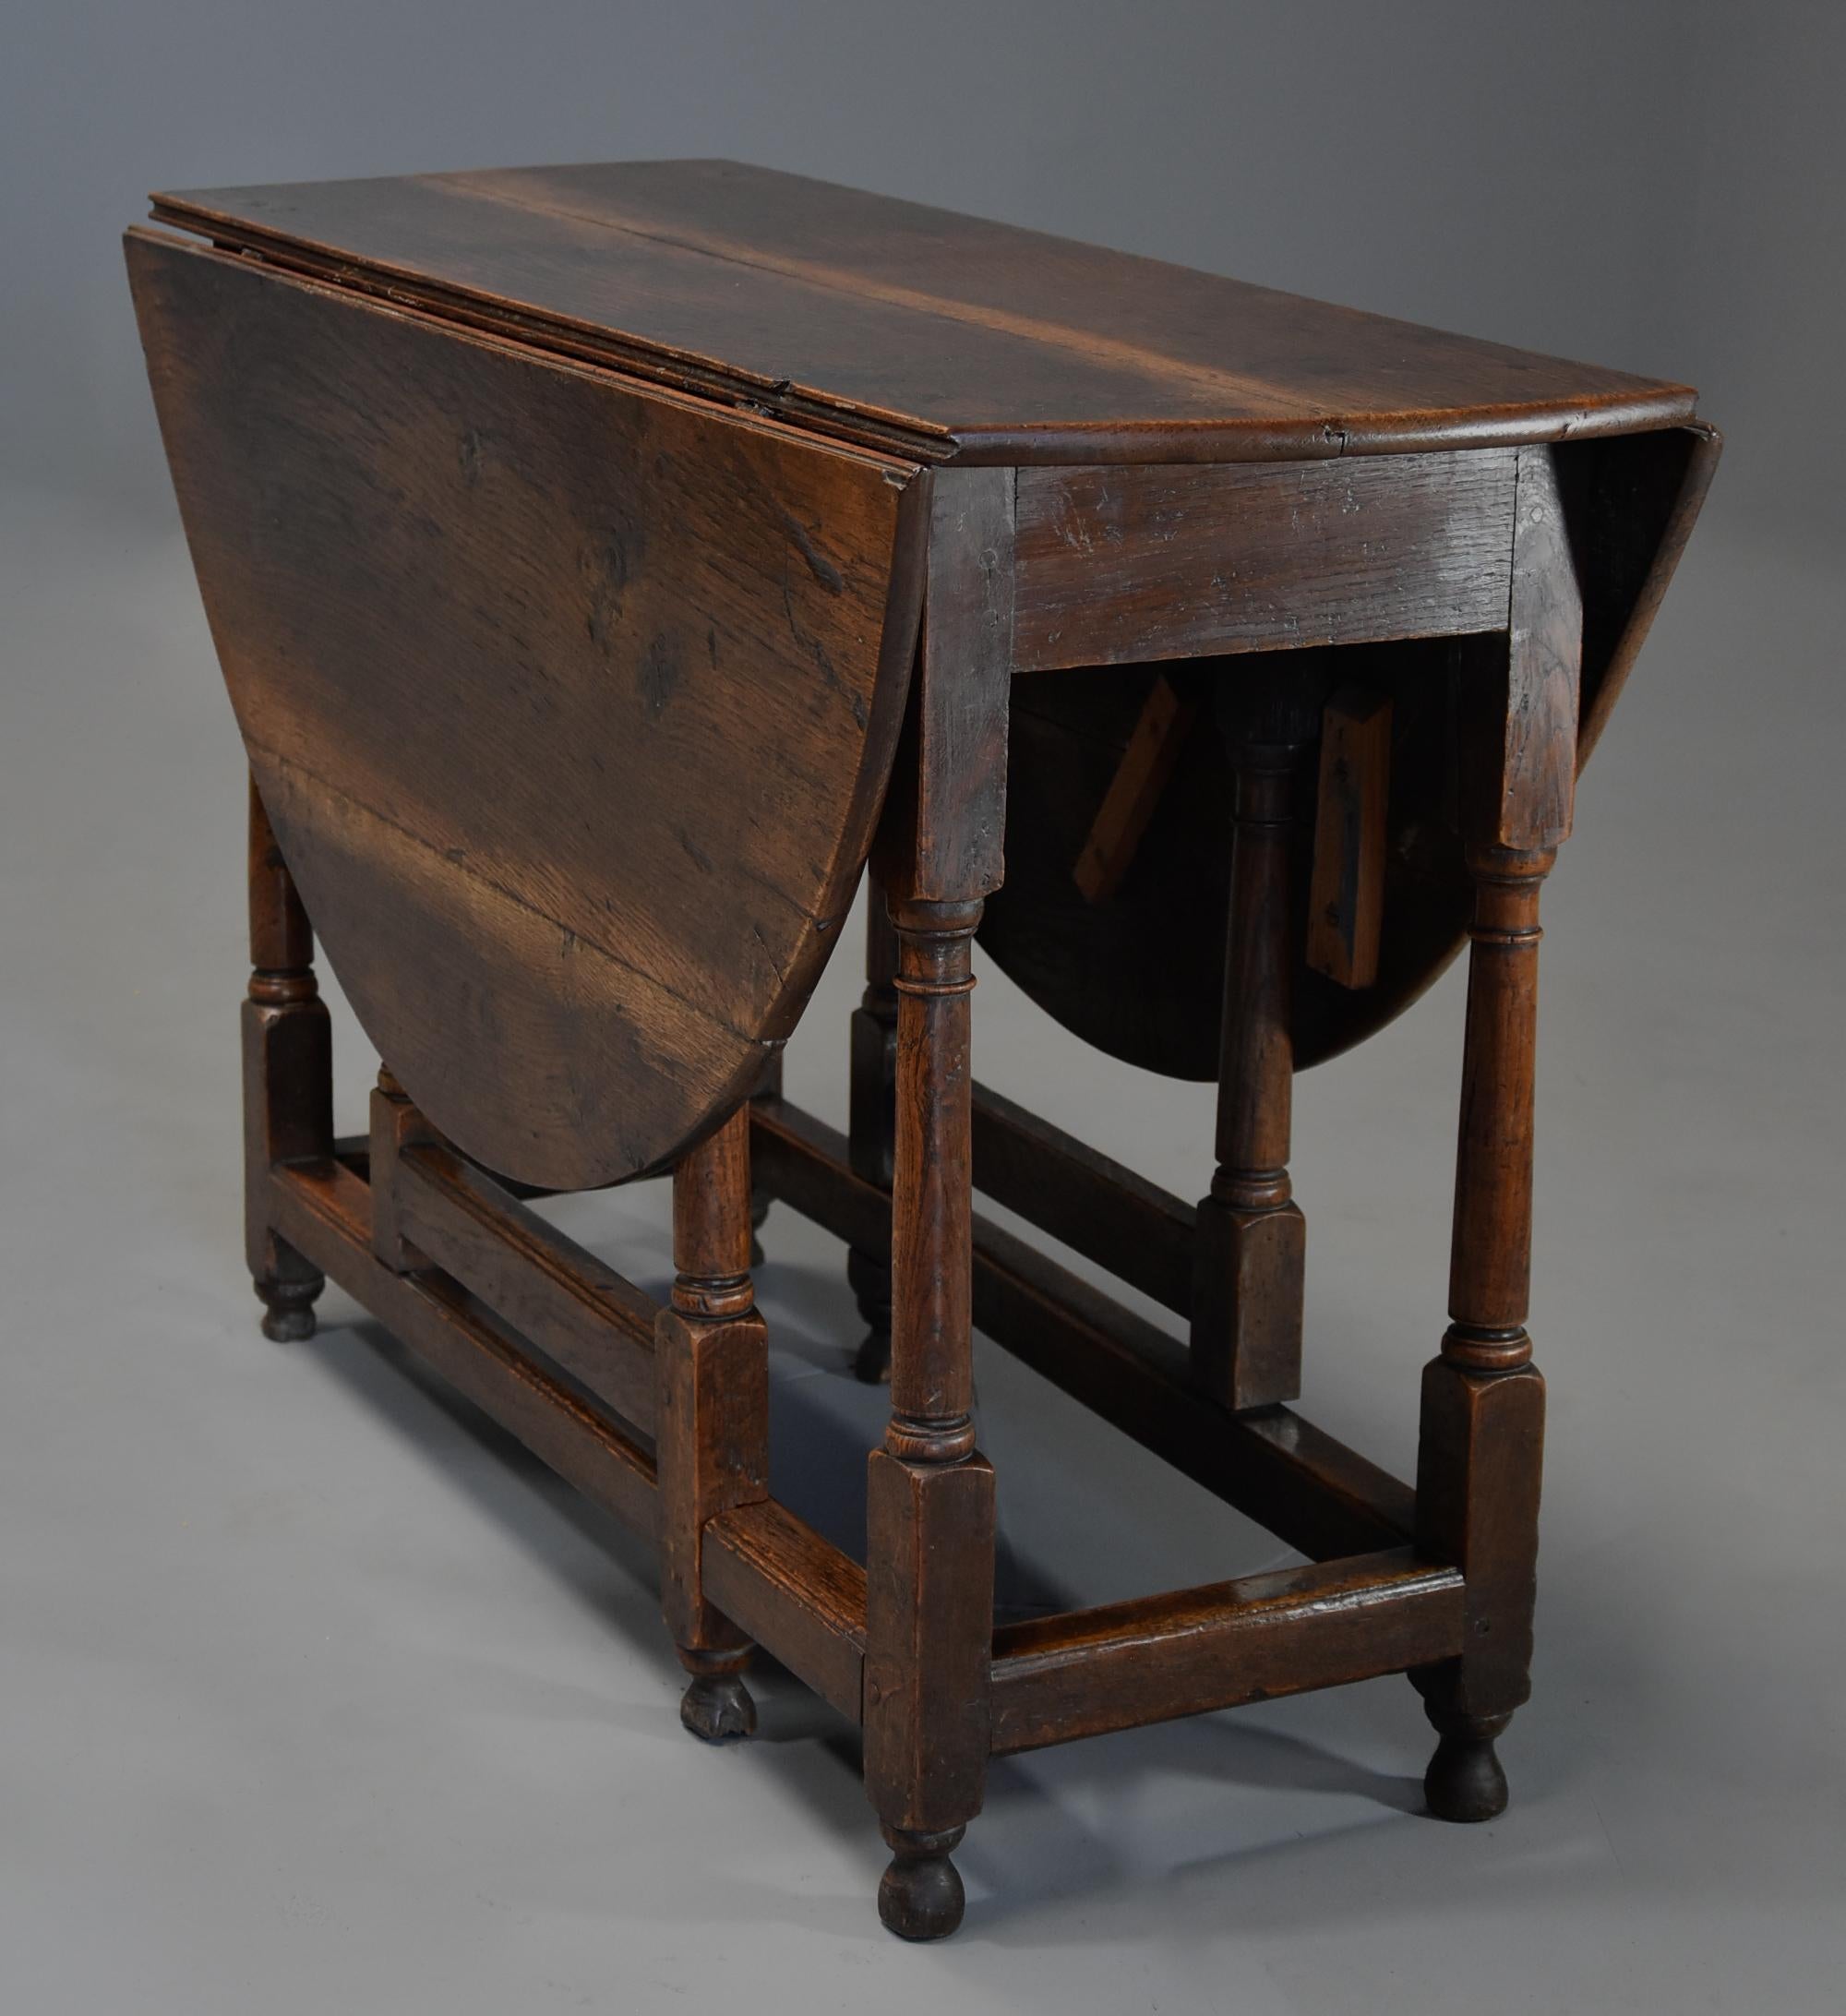 English Early 18th Century Oak Gateleg Table with Superb Original Patina For Sale 9